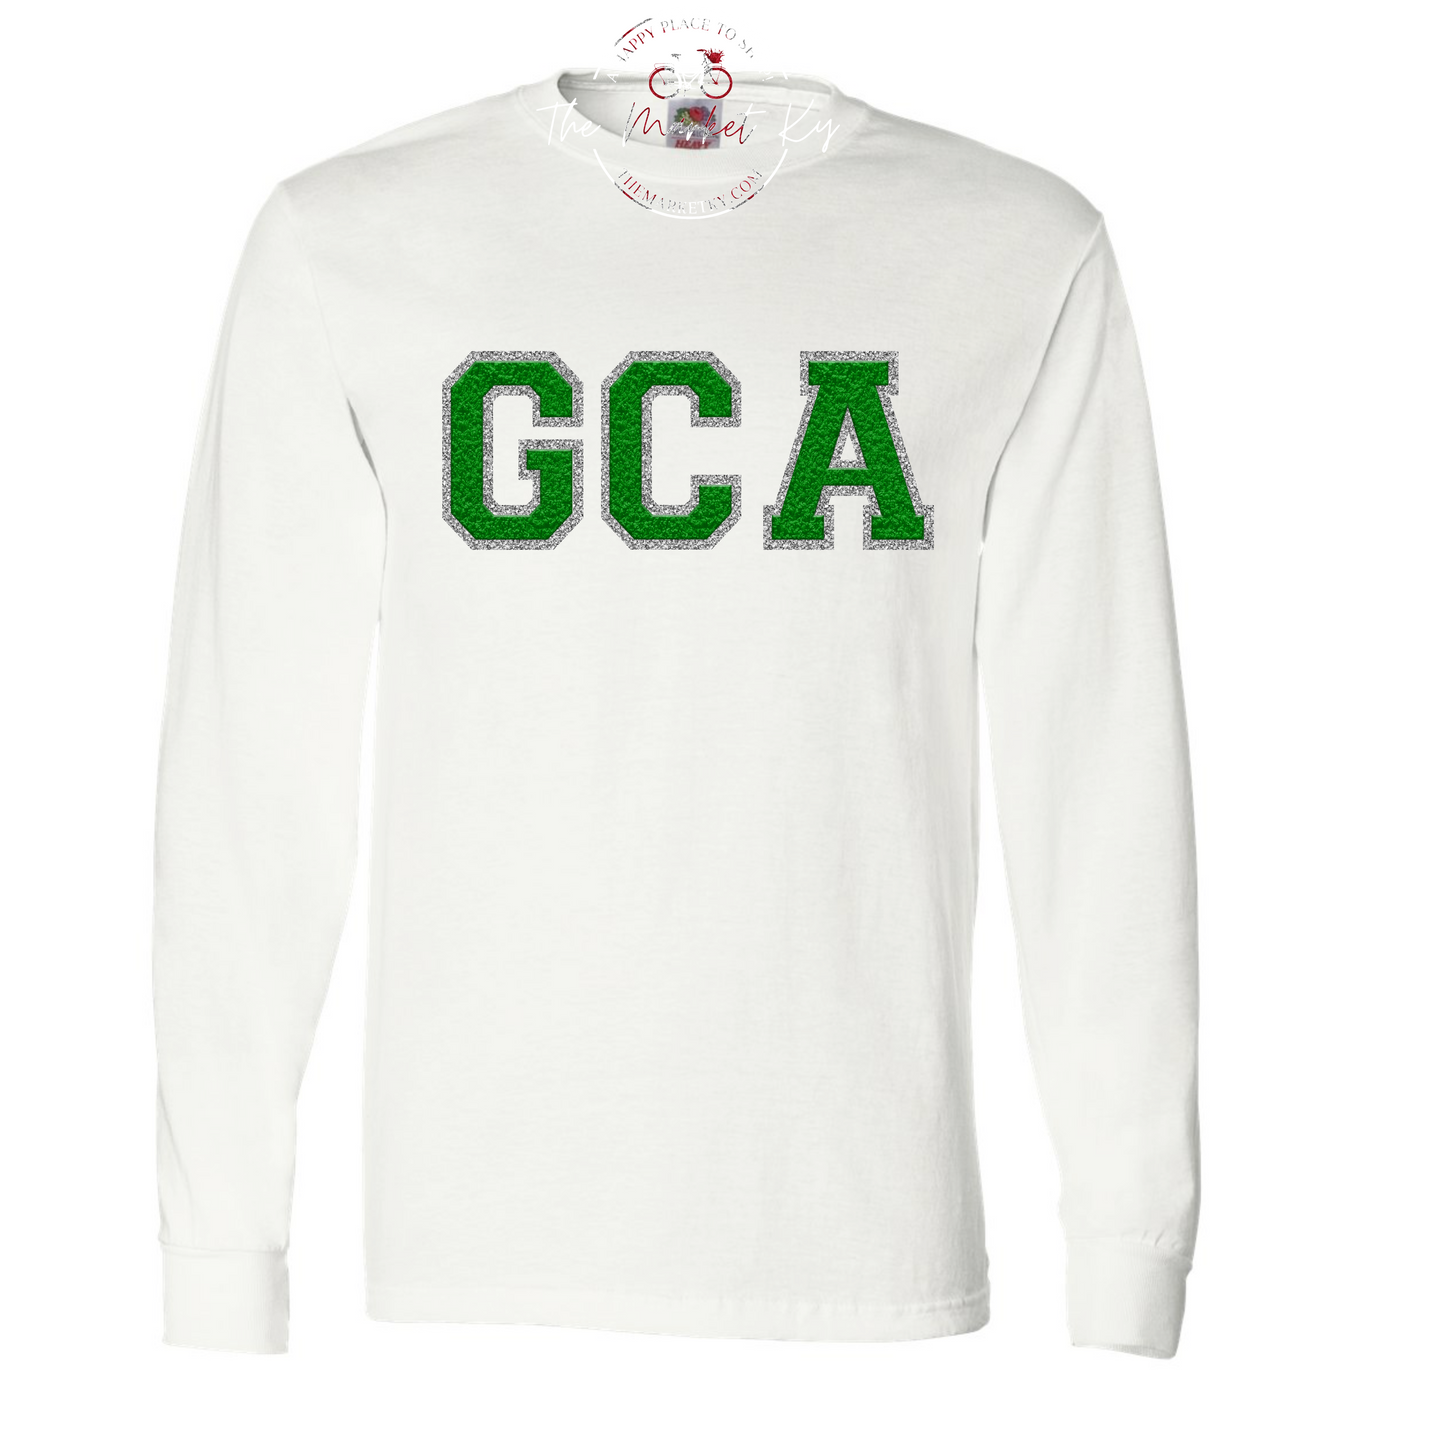 GCA  Faux Chenille Long Sleeve Tee (Youth & Adult)-  White